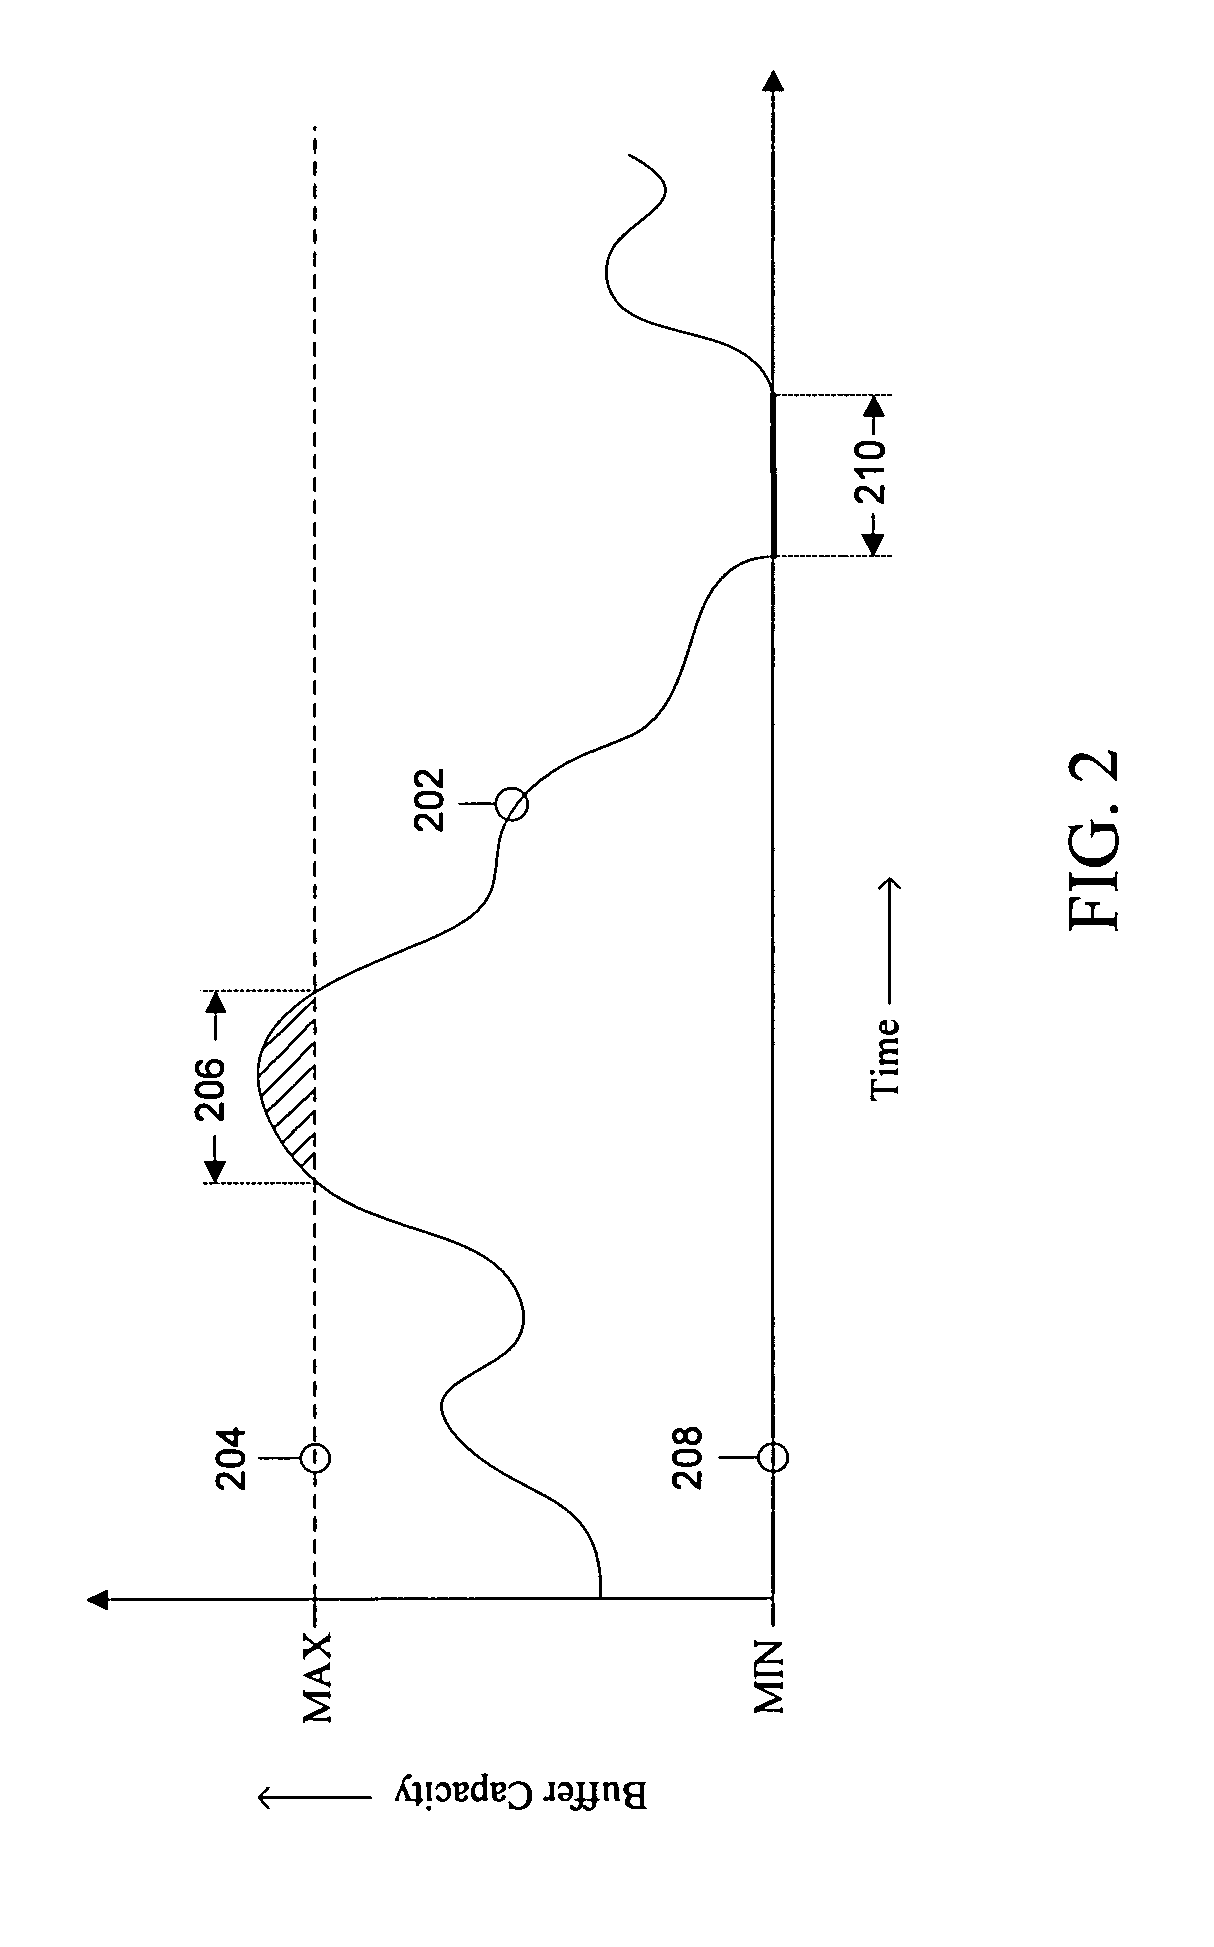 Controlling buffer states in video compression coding to enable editing and distributed encoding